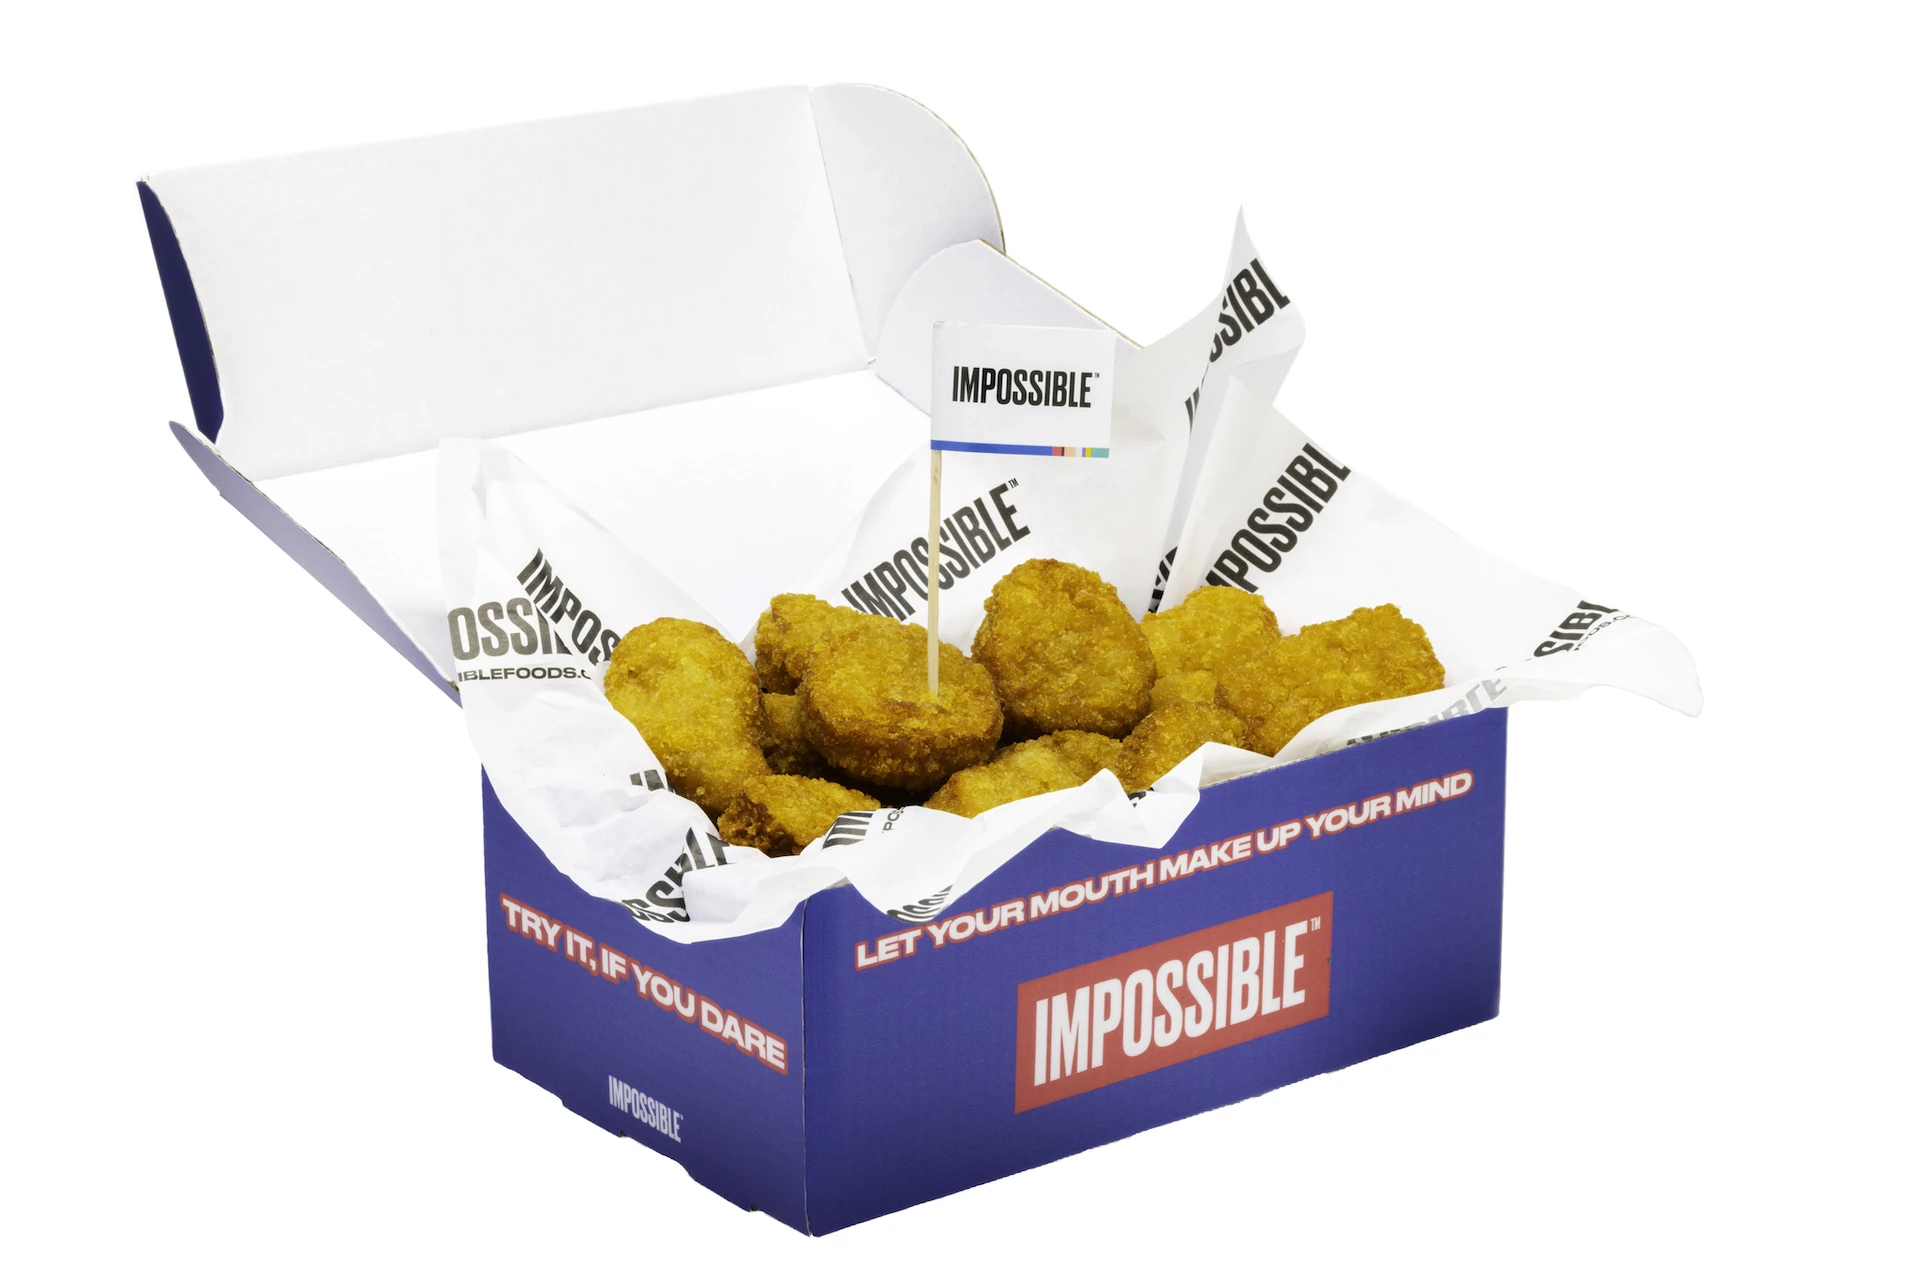 Open chicken box image for UK News Release.